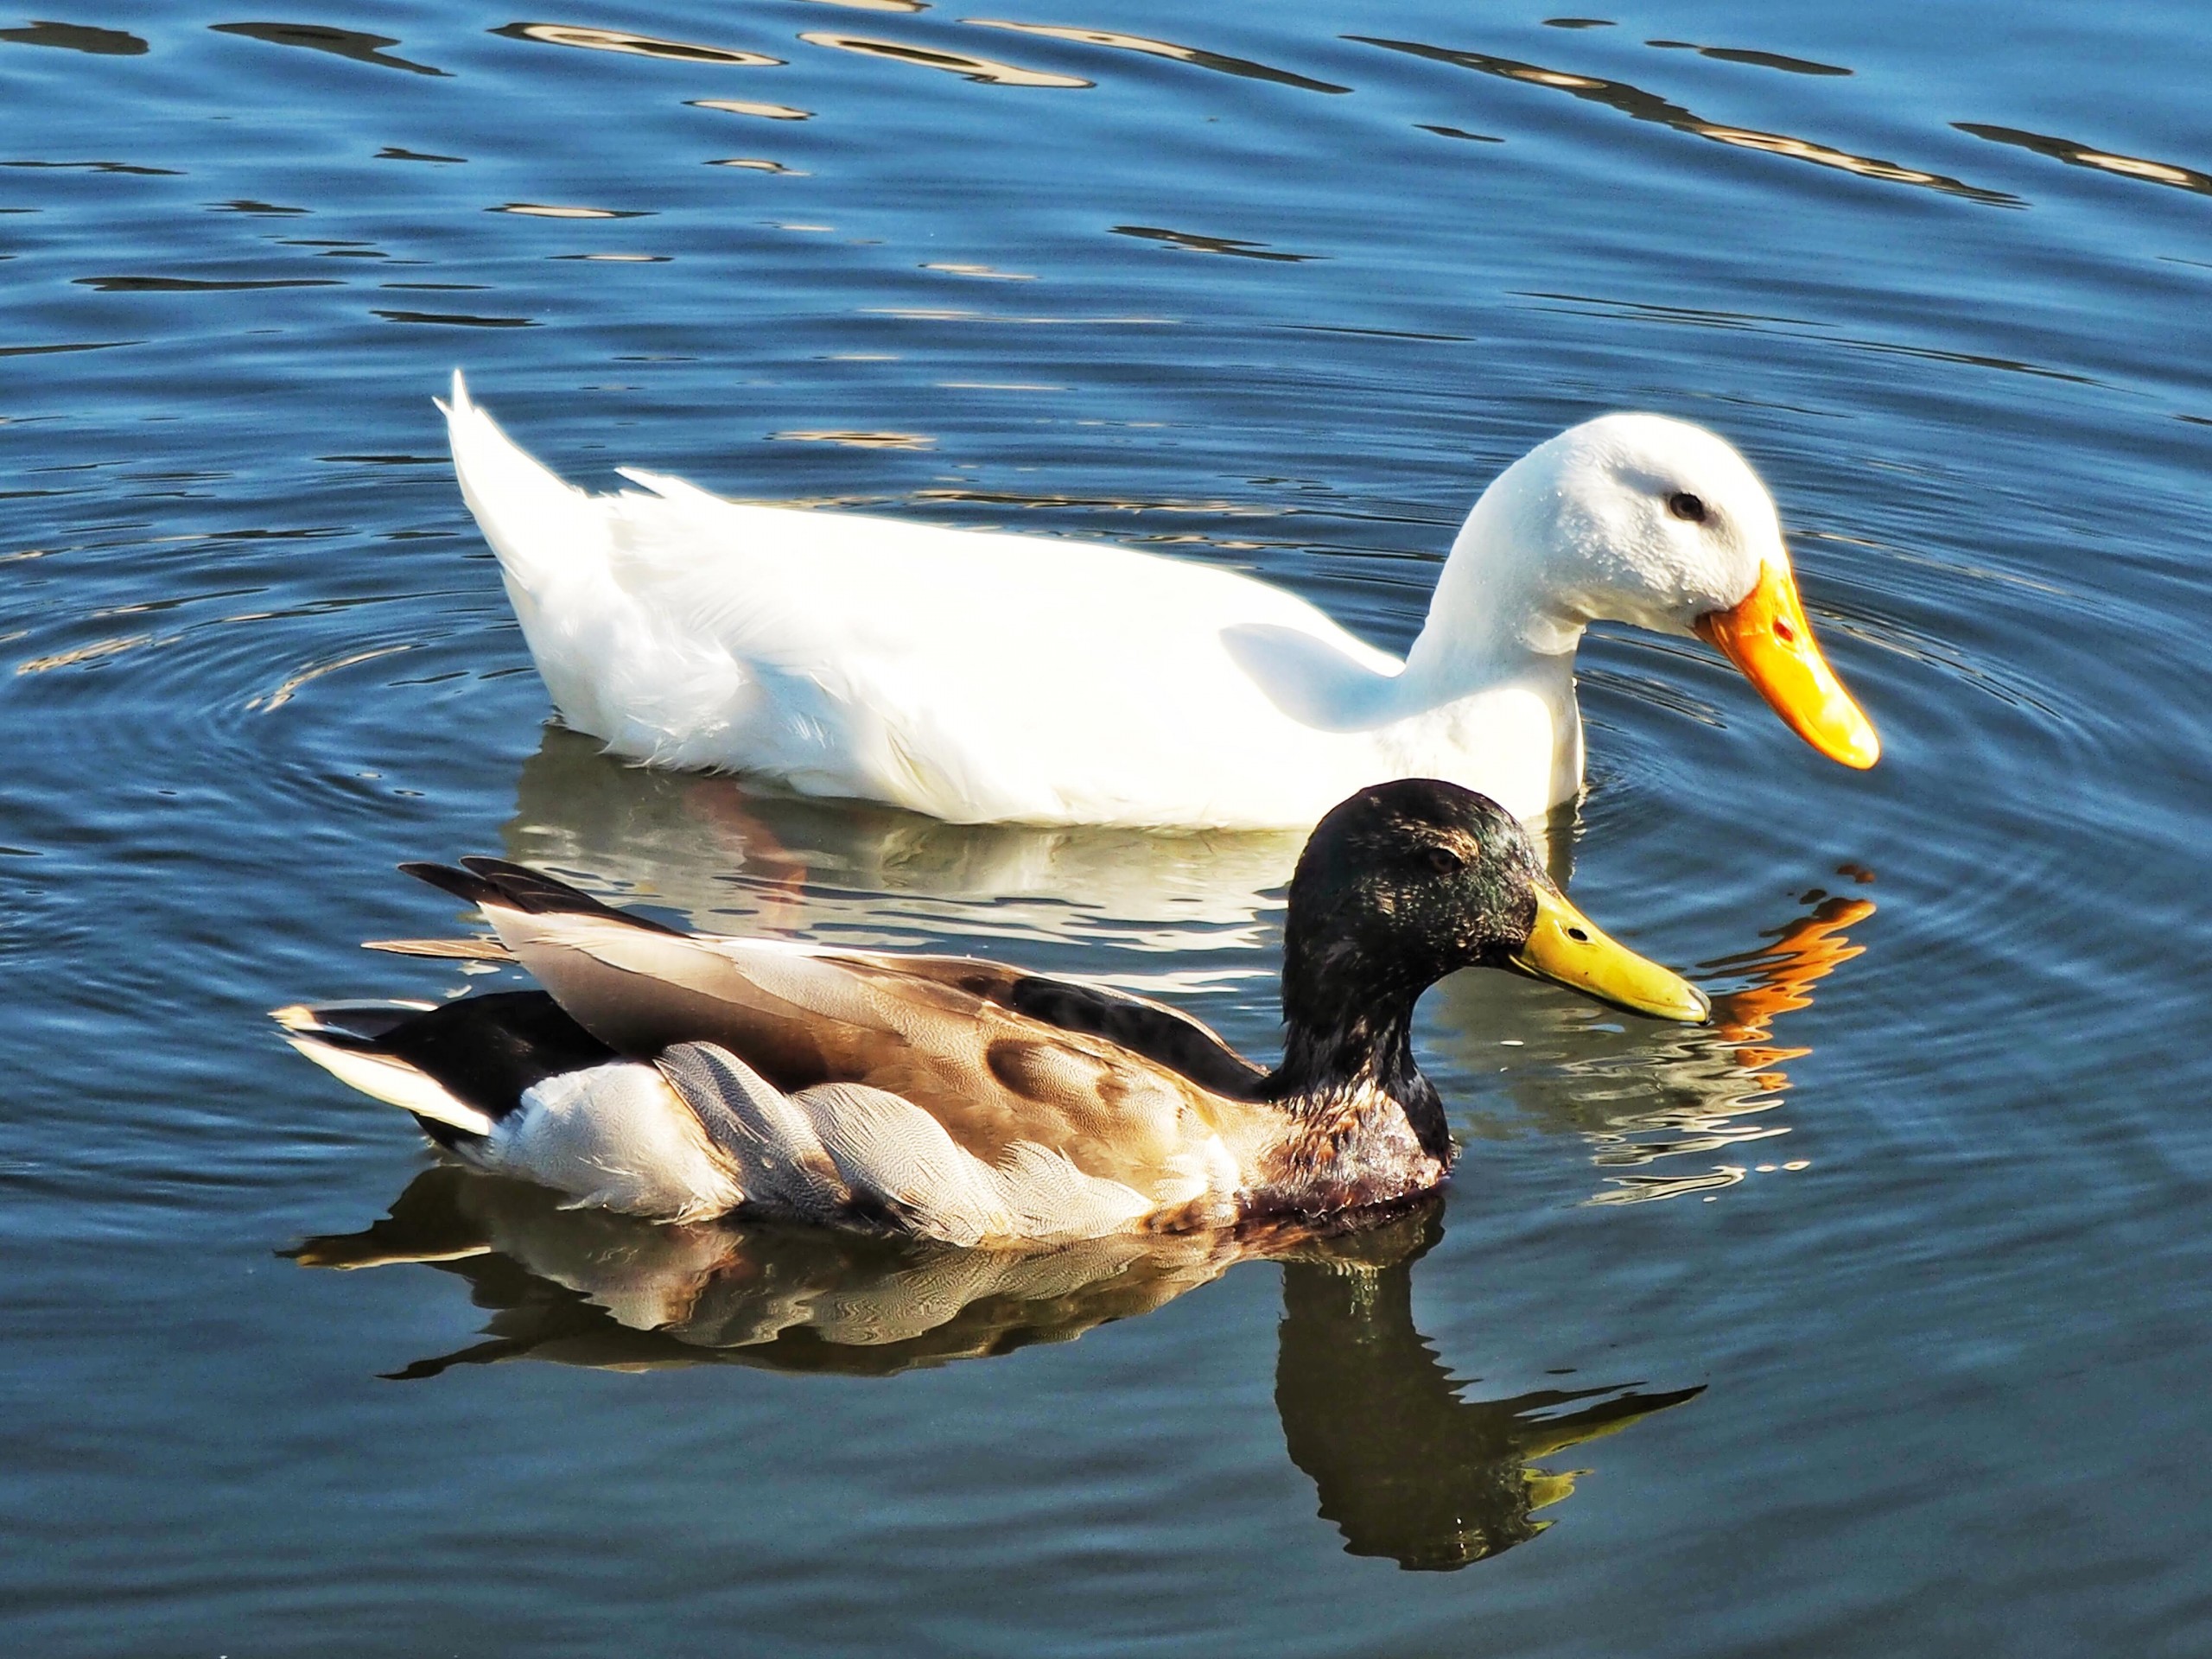 Two ducks floating on water